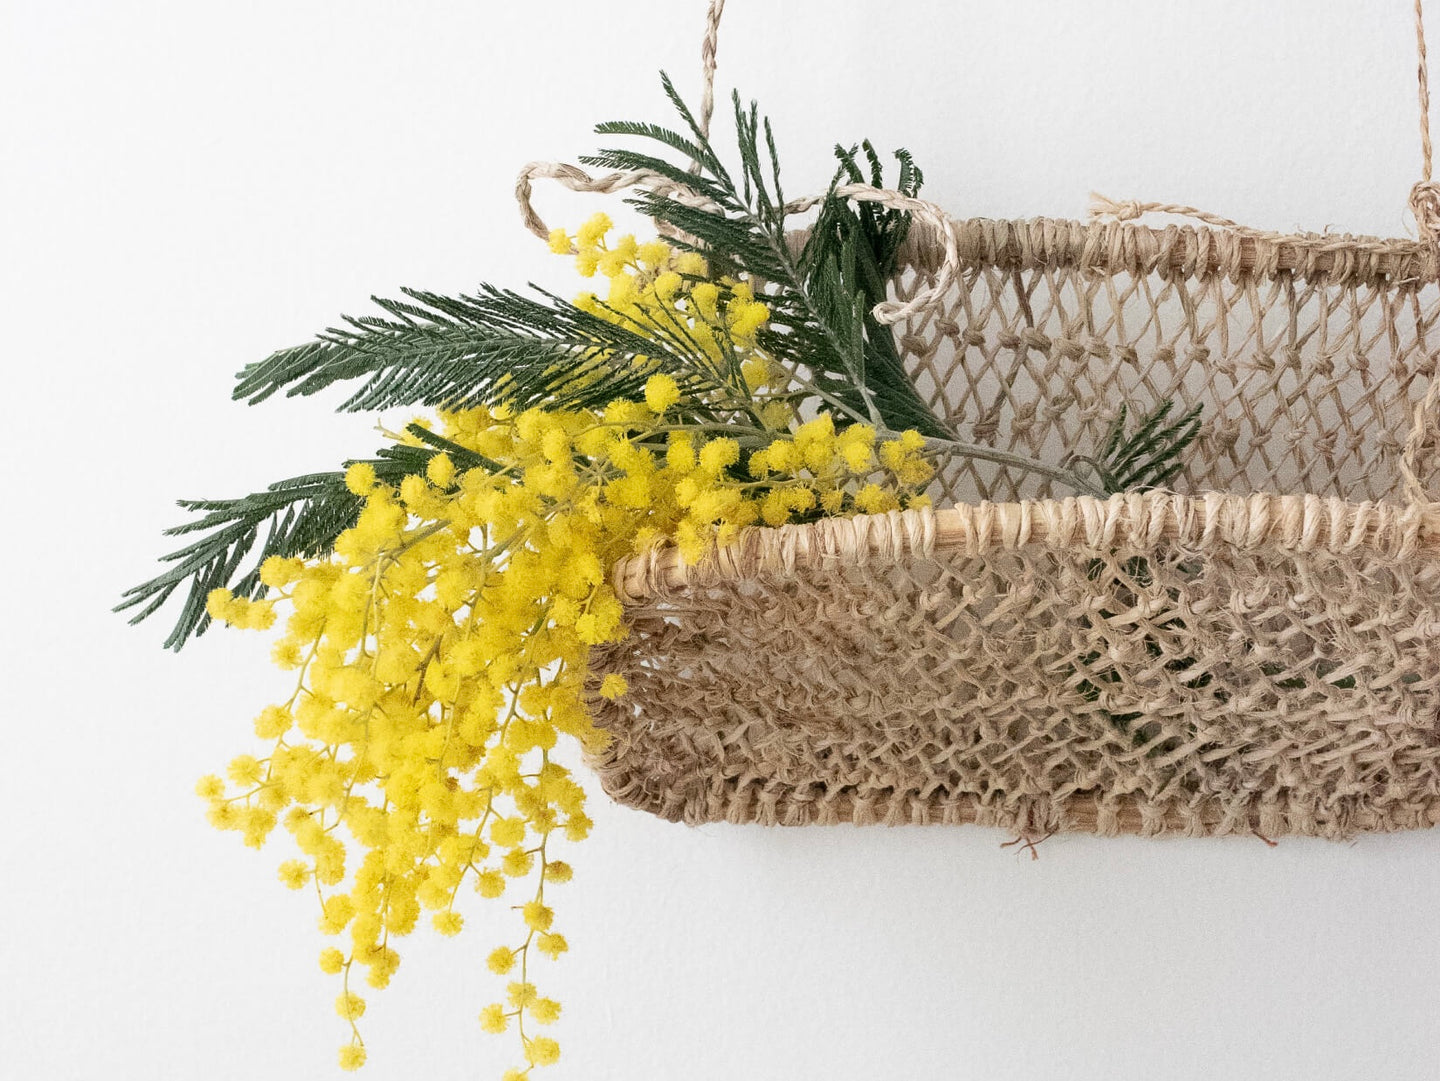 handwoven huacal jonote basket holding dried florals